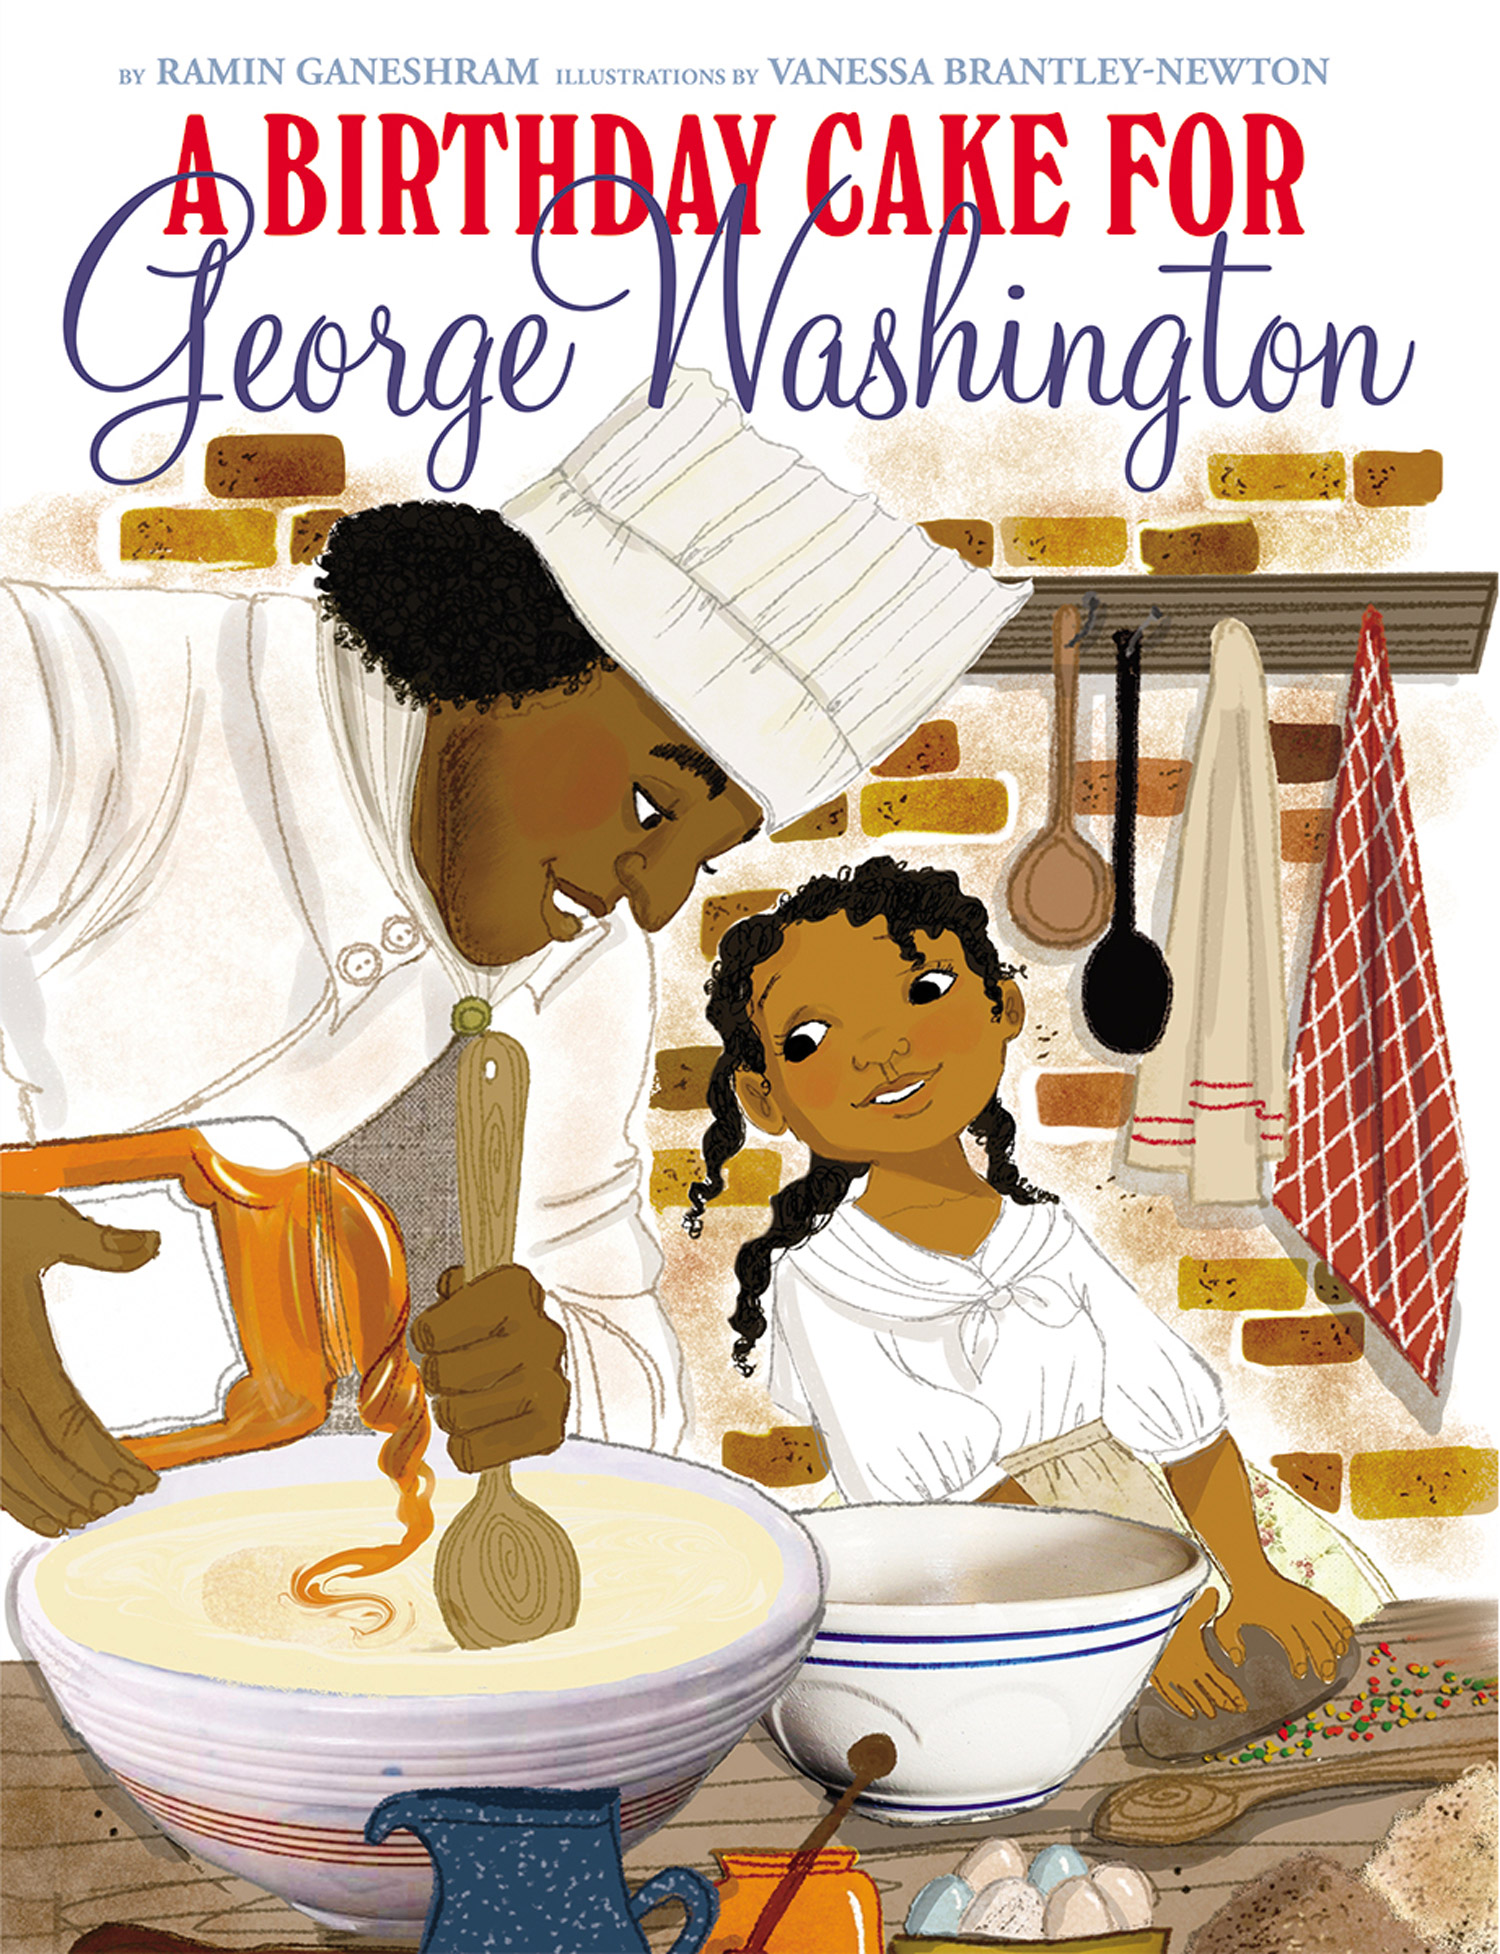 This image provided by Scholastic shows the cover of the book ""A Birthday Cake for George Washington" by by Ramin Ganeshram. Scholastic annonced Sunday, Jan. 17, 2016, that it is pulling the controversial new picture book about George Washington and his slaves. "A Birthday Cake for George Washington" was released Jan. 5 and had been strongly criticized for its upbeat images and story of Washington's cook, the slave Hercules. (Scholastic via AP)